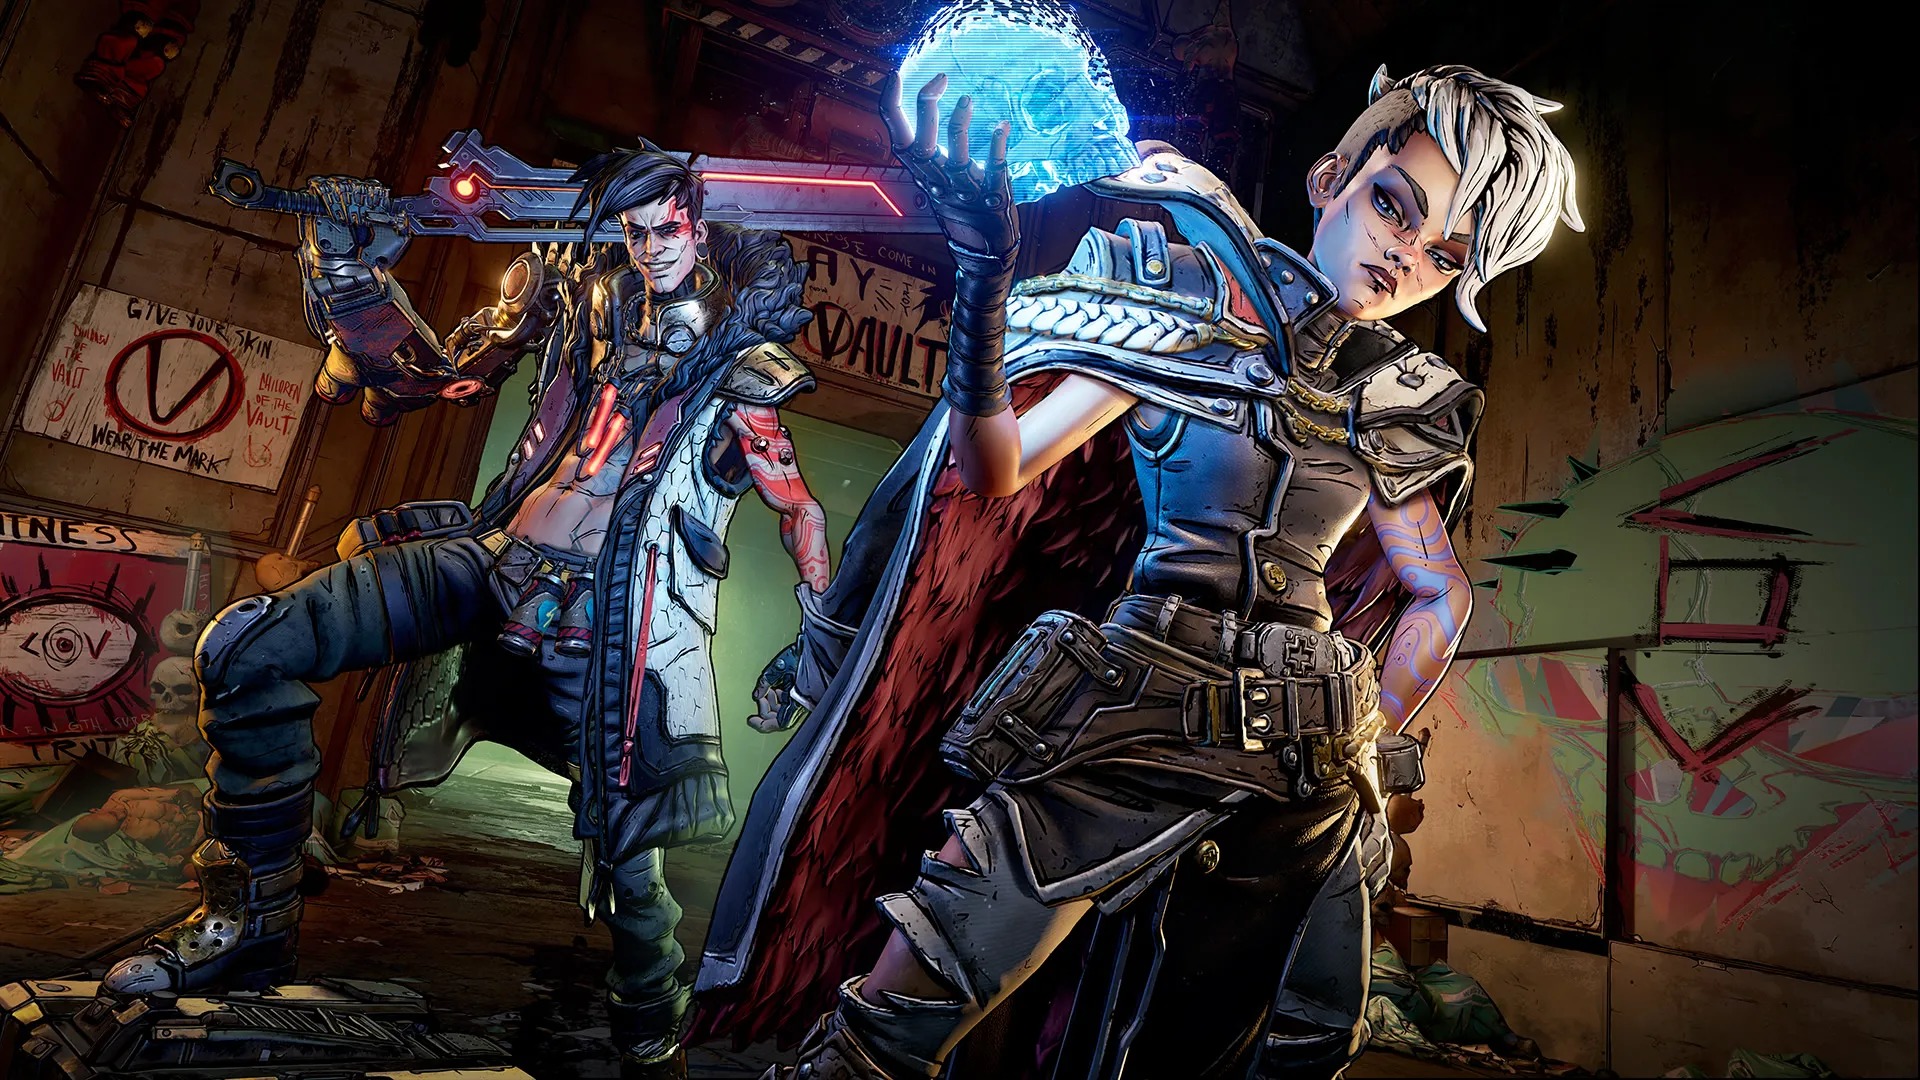 Borderlands 3 is the first free PC game of Epic Games Store’s Mega Sale